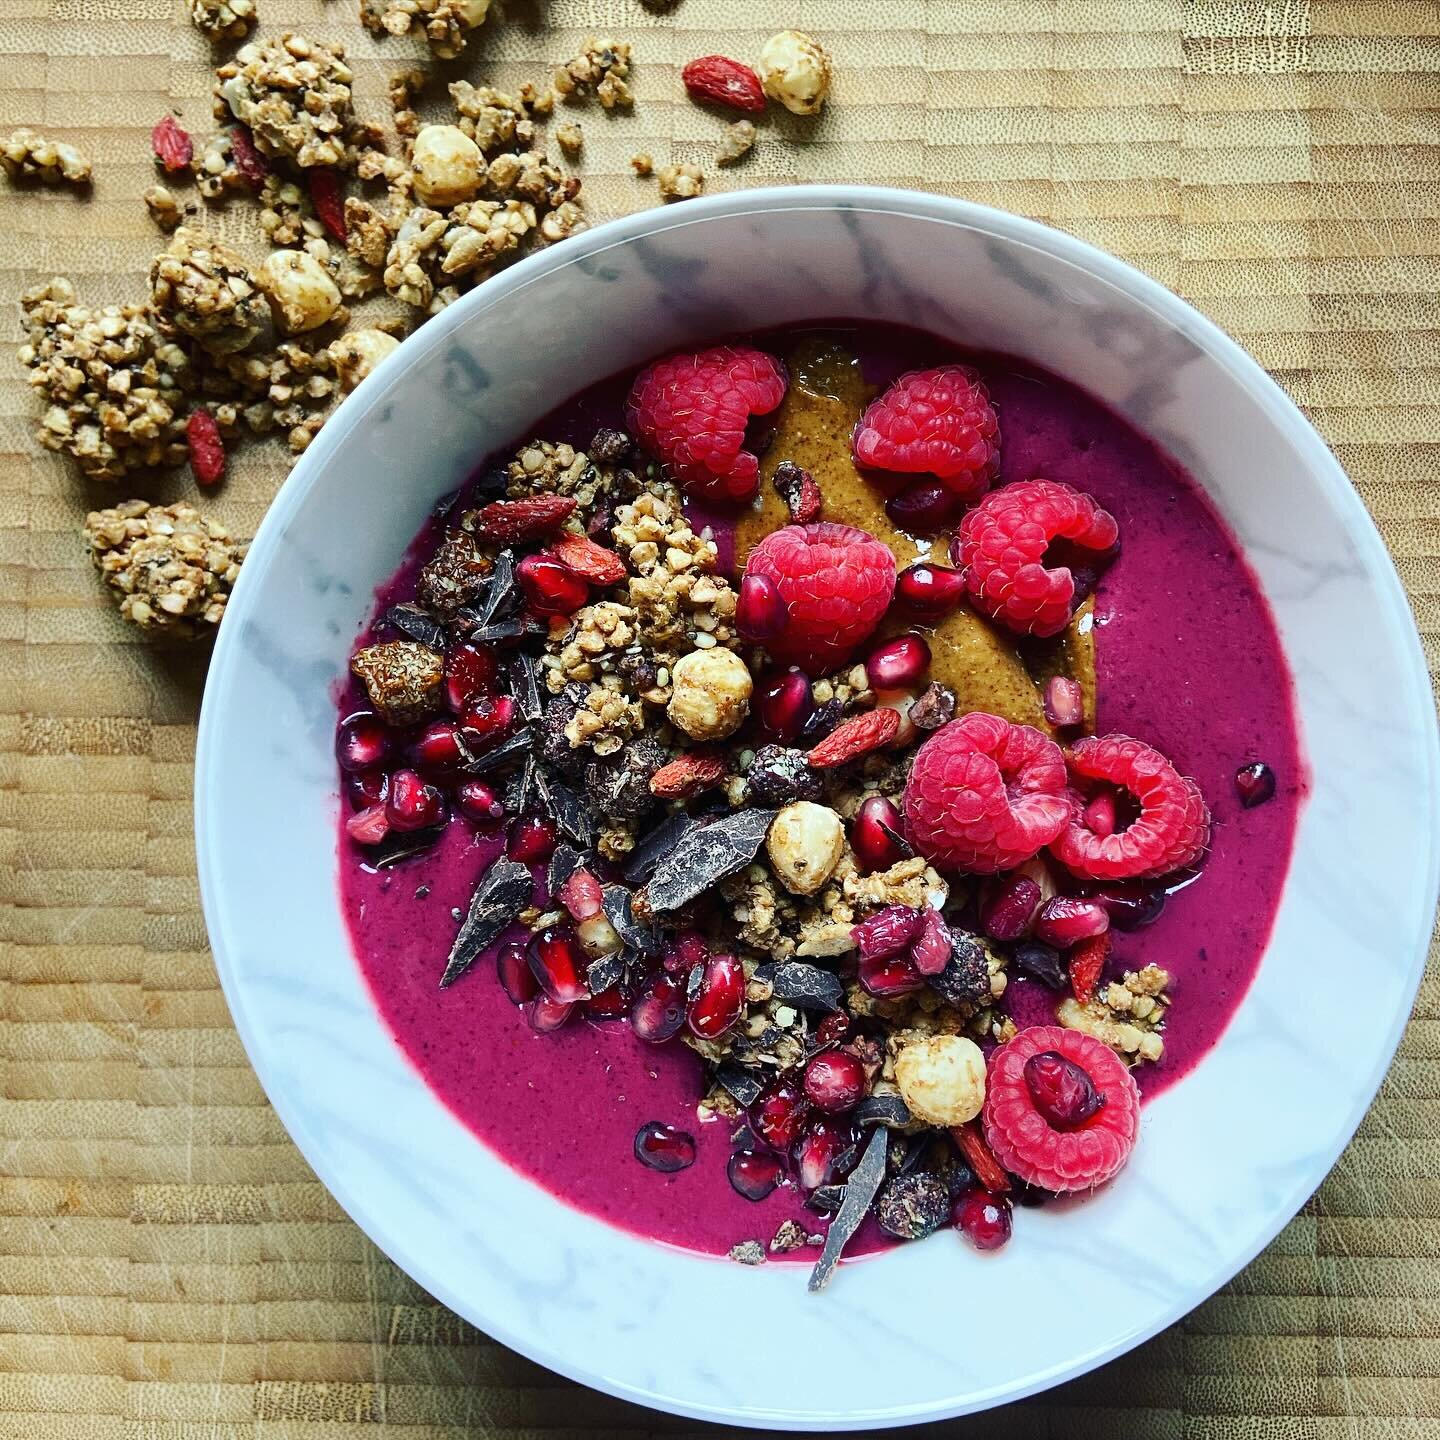 Berry bliss with buckwheat granola and a smidge of dark chocolate, seriously scrummy. 😋 

#smoothiebowls #retreatfood #retreatlifestyle #feelgoodfoodie #feelgoodchef #retreatchef #ukretreat #northdevonfood #devonfoodie #wellnessfoodies